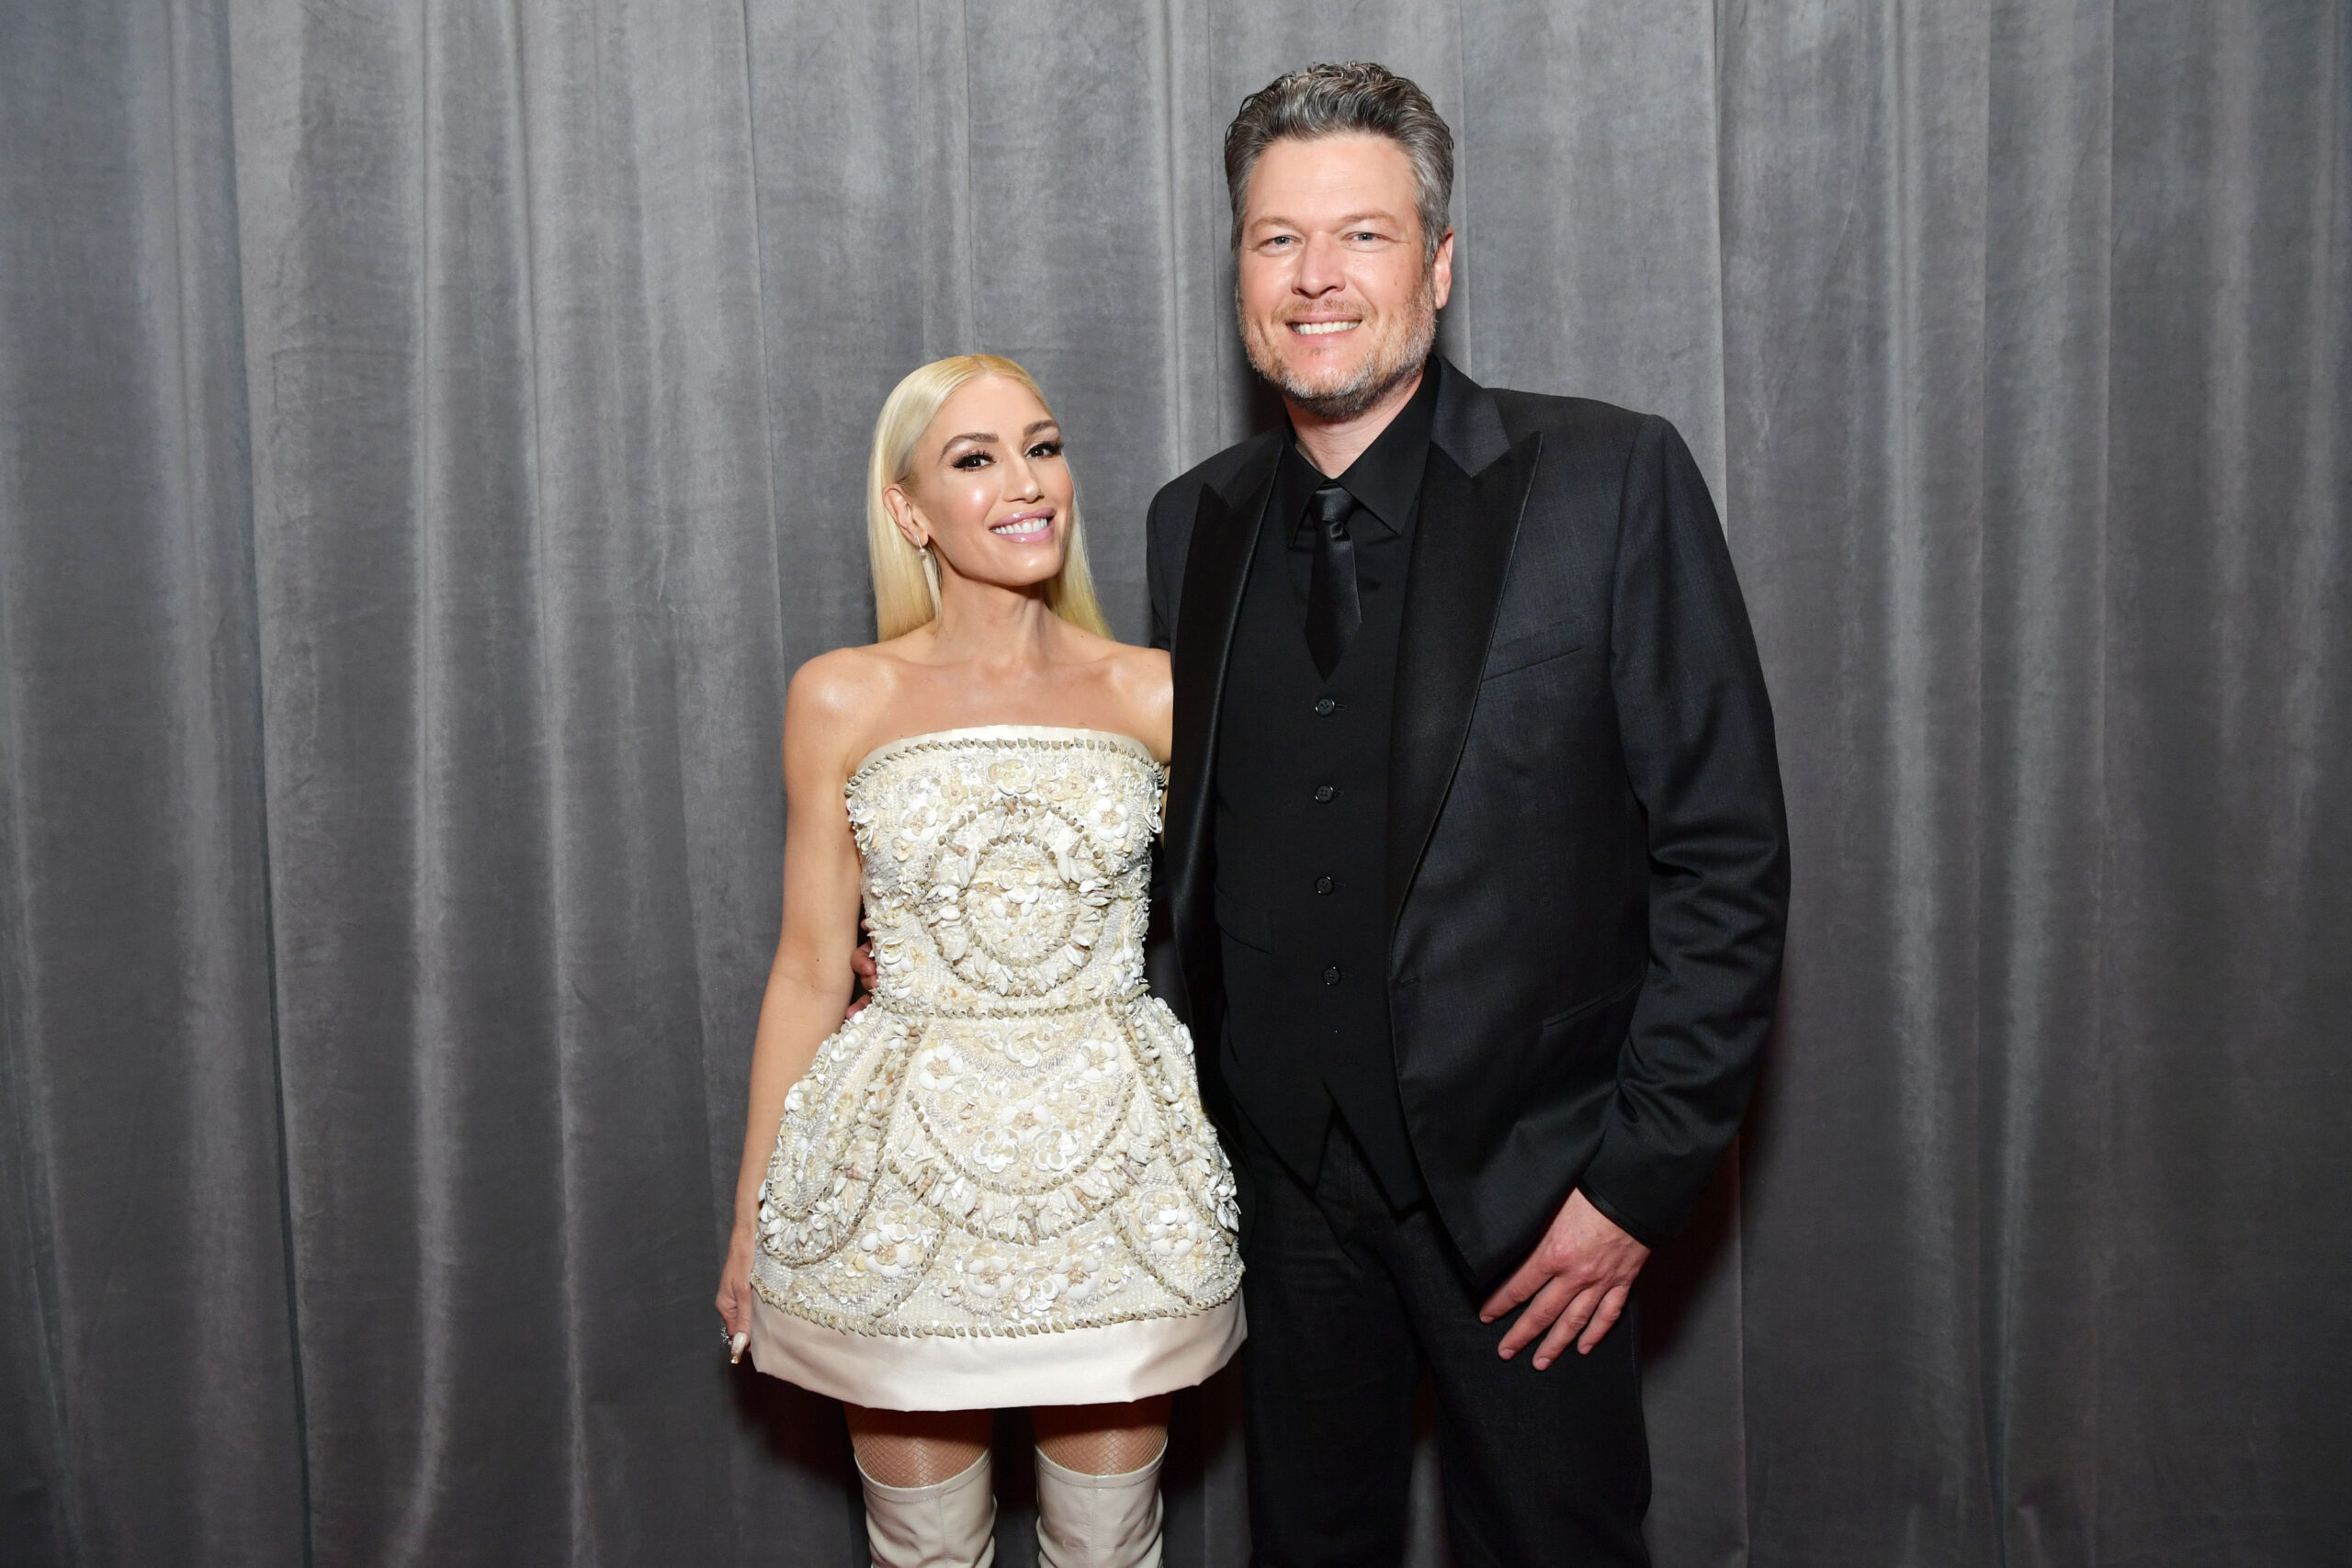 Gwen Stefani And Blake Shelton Get Married In Intimate Ceremony in